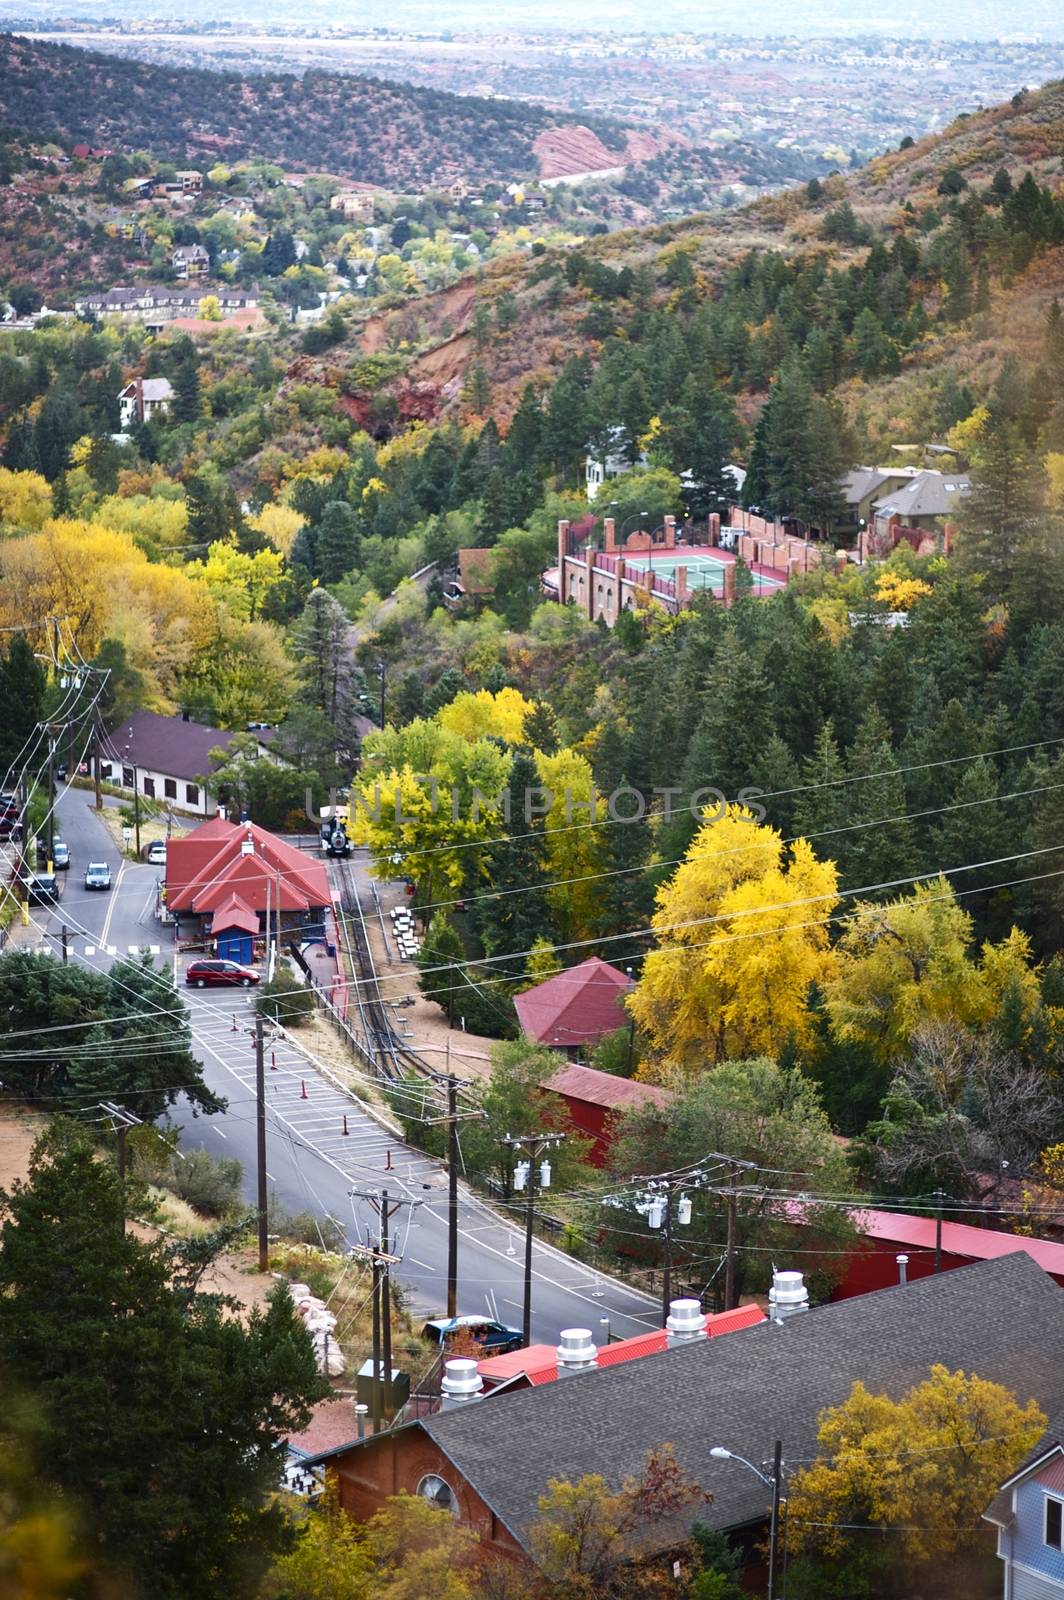 Manitou Springs by welcomia